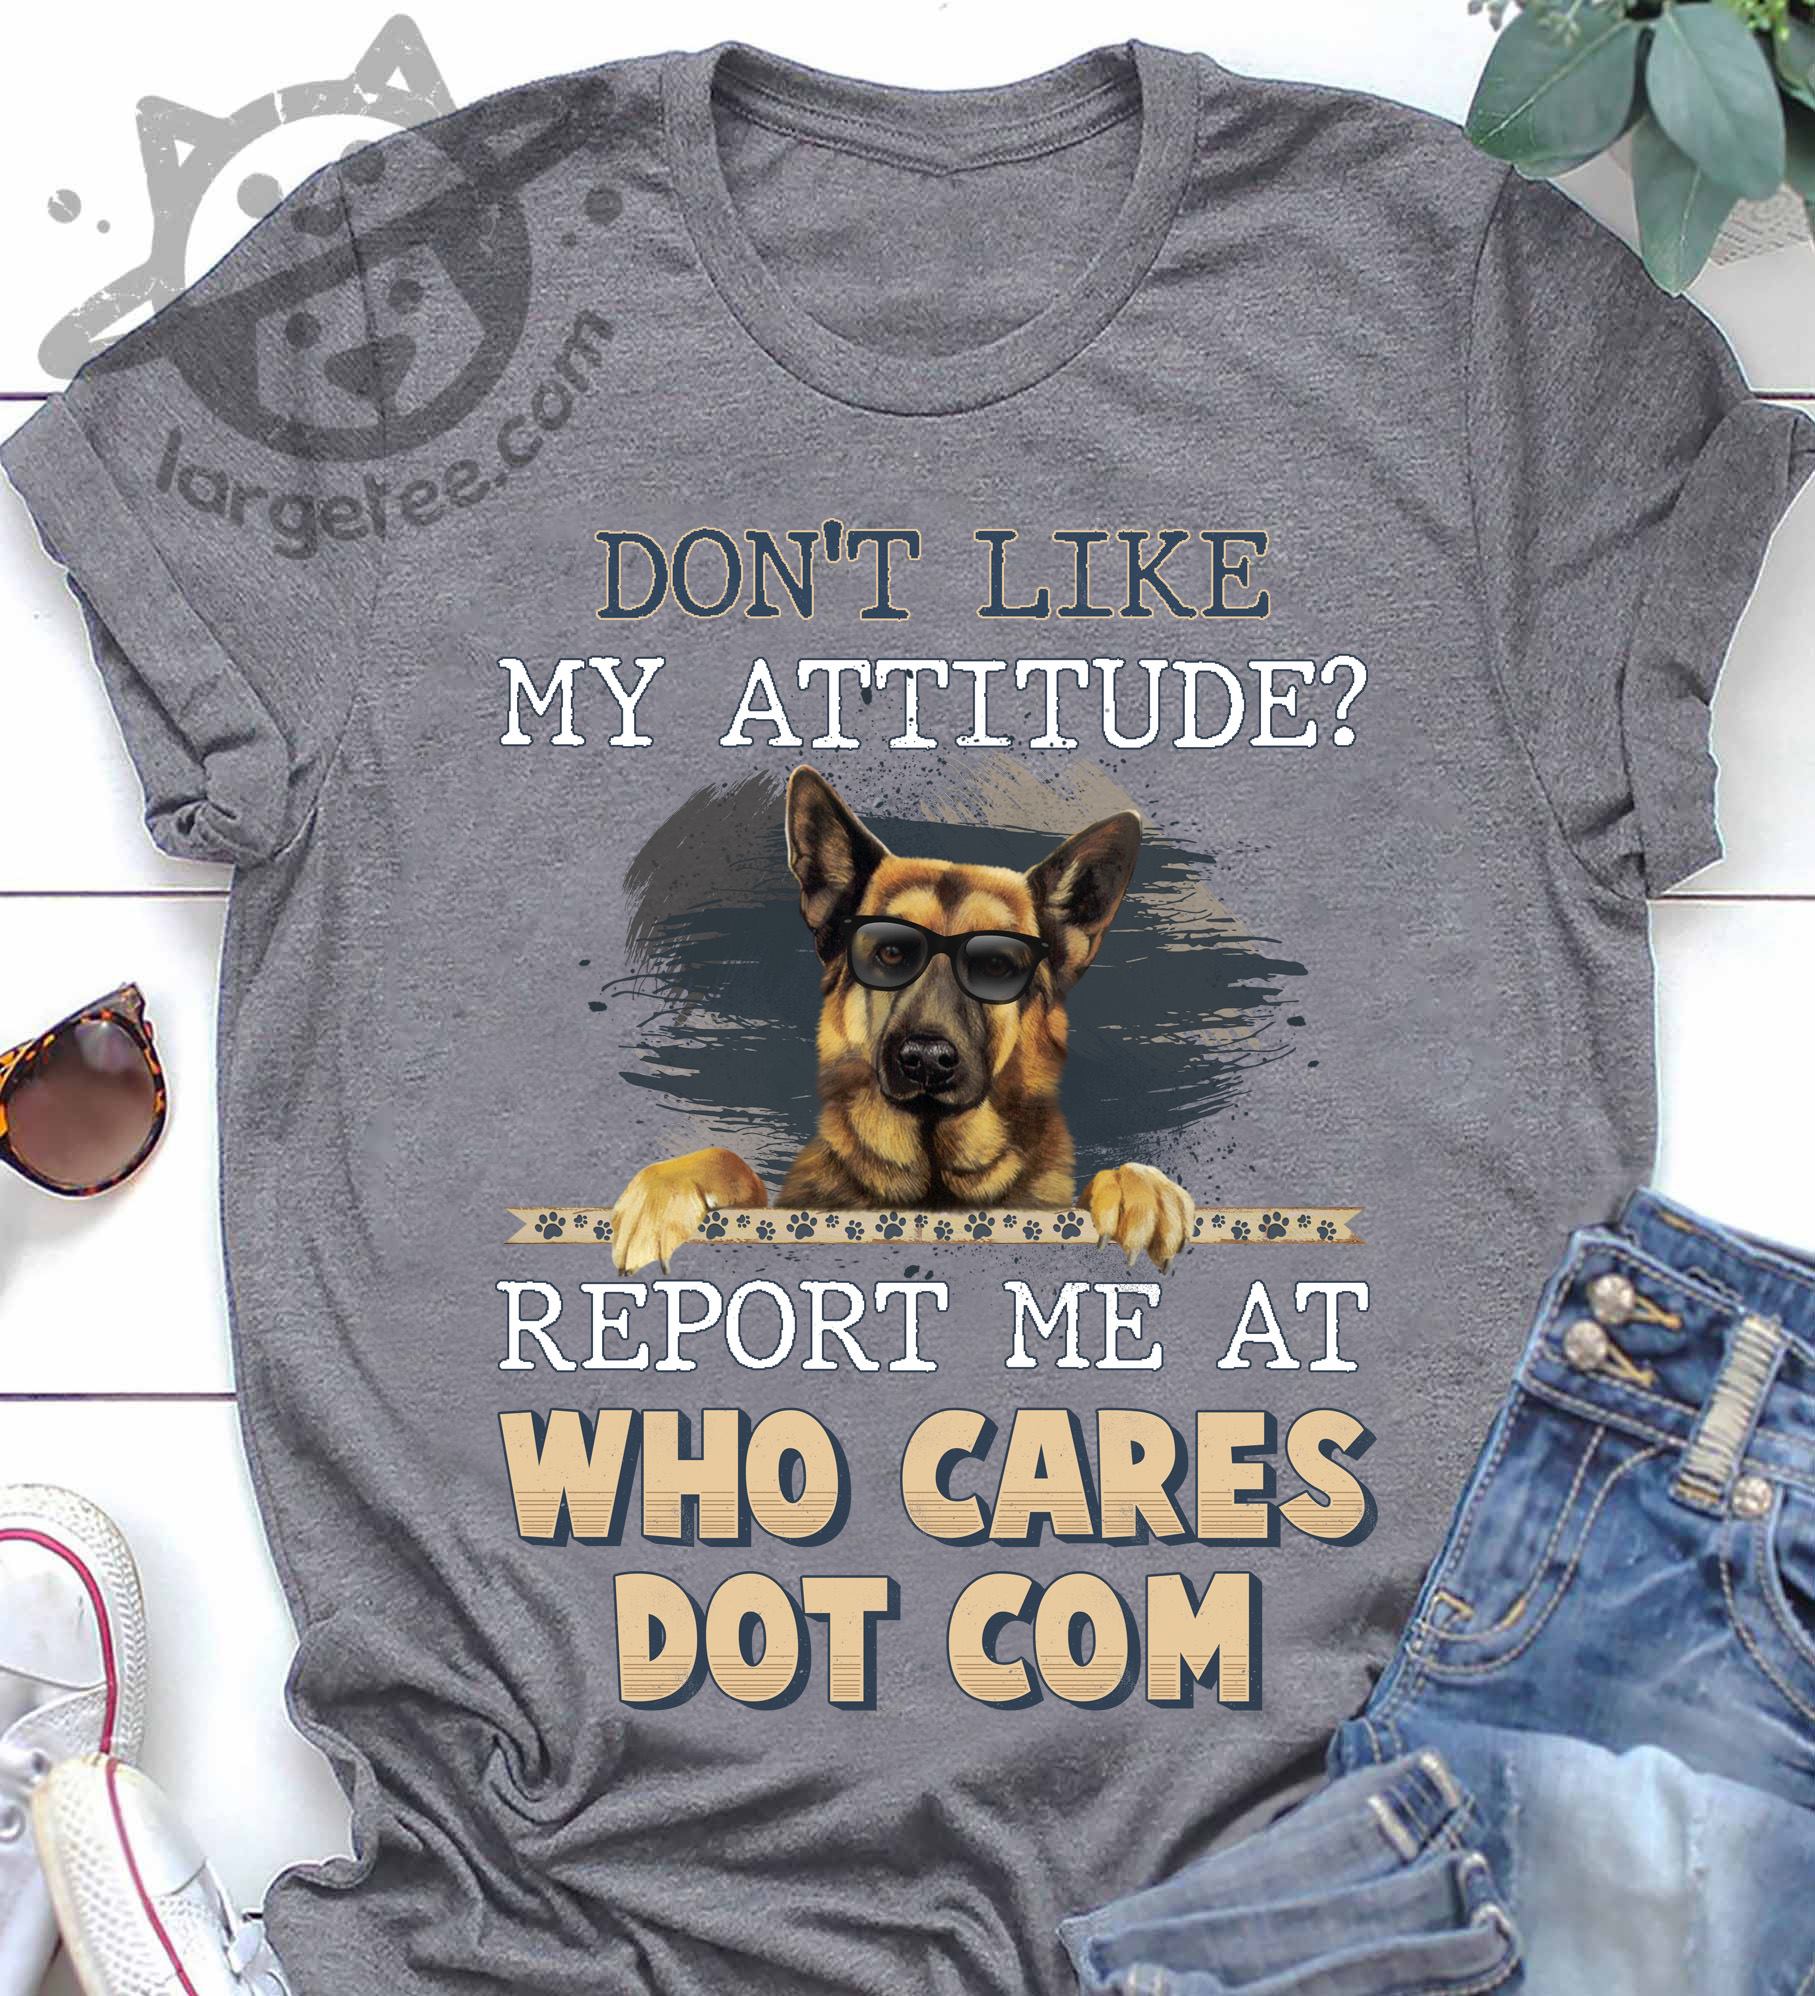 Don't like my attitude Report me at who cares dot com - German shepherd